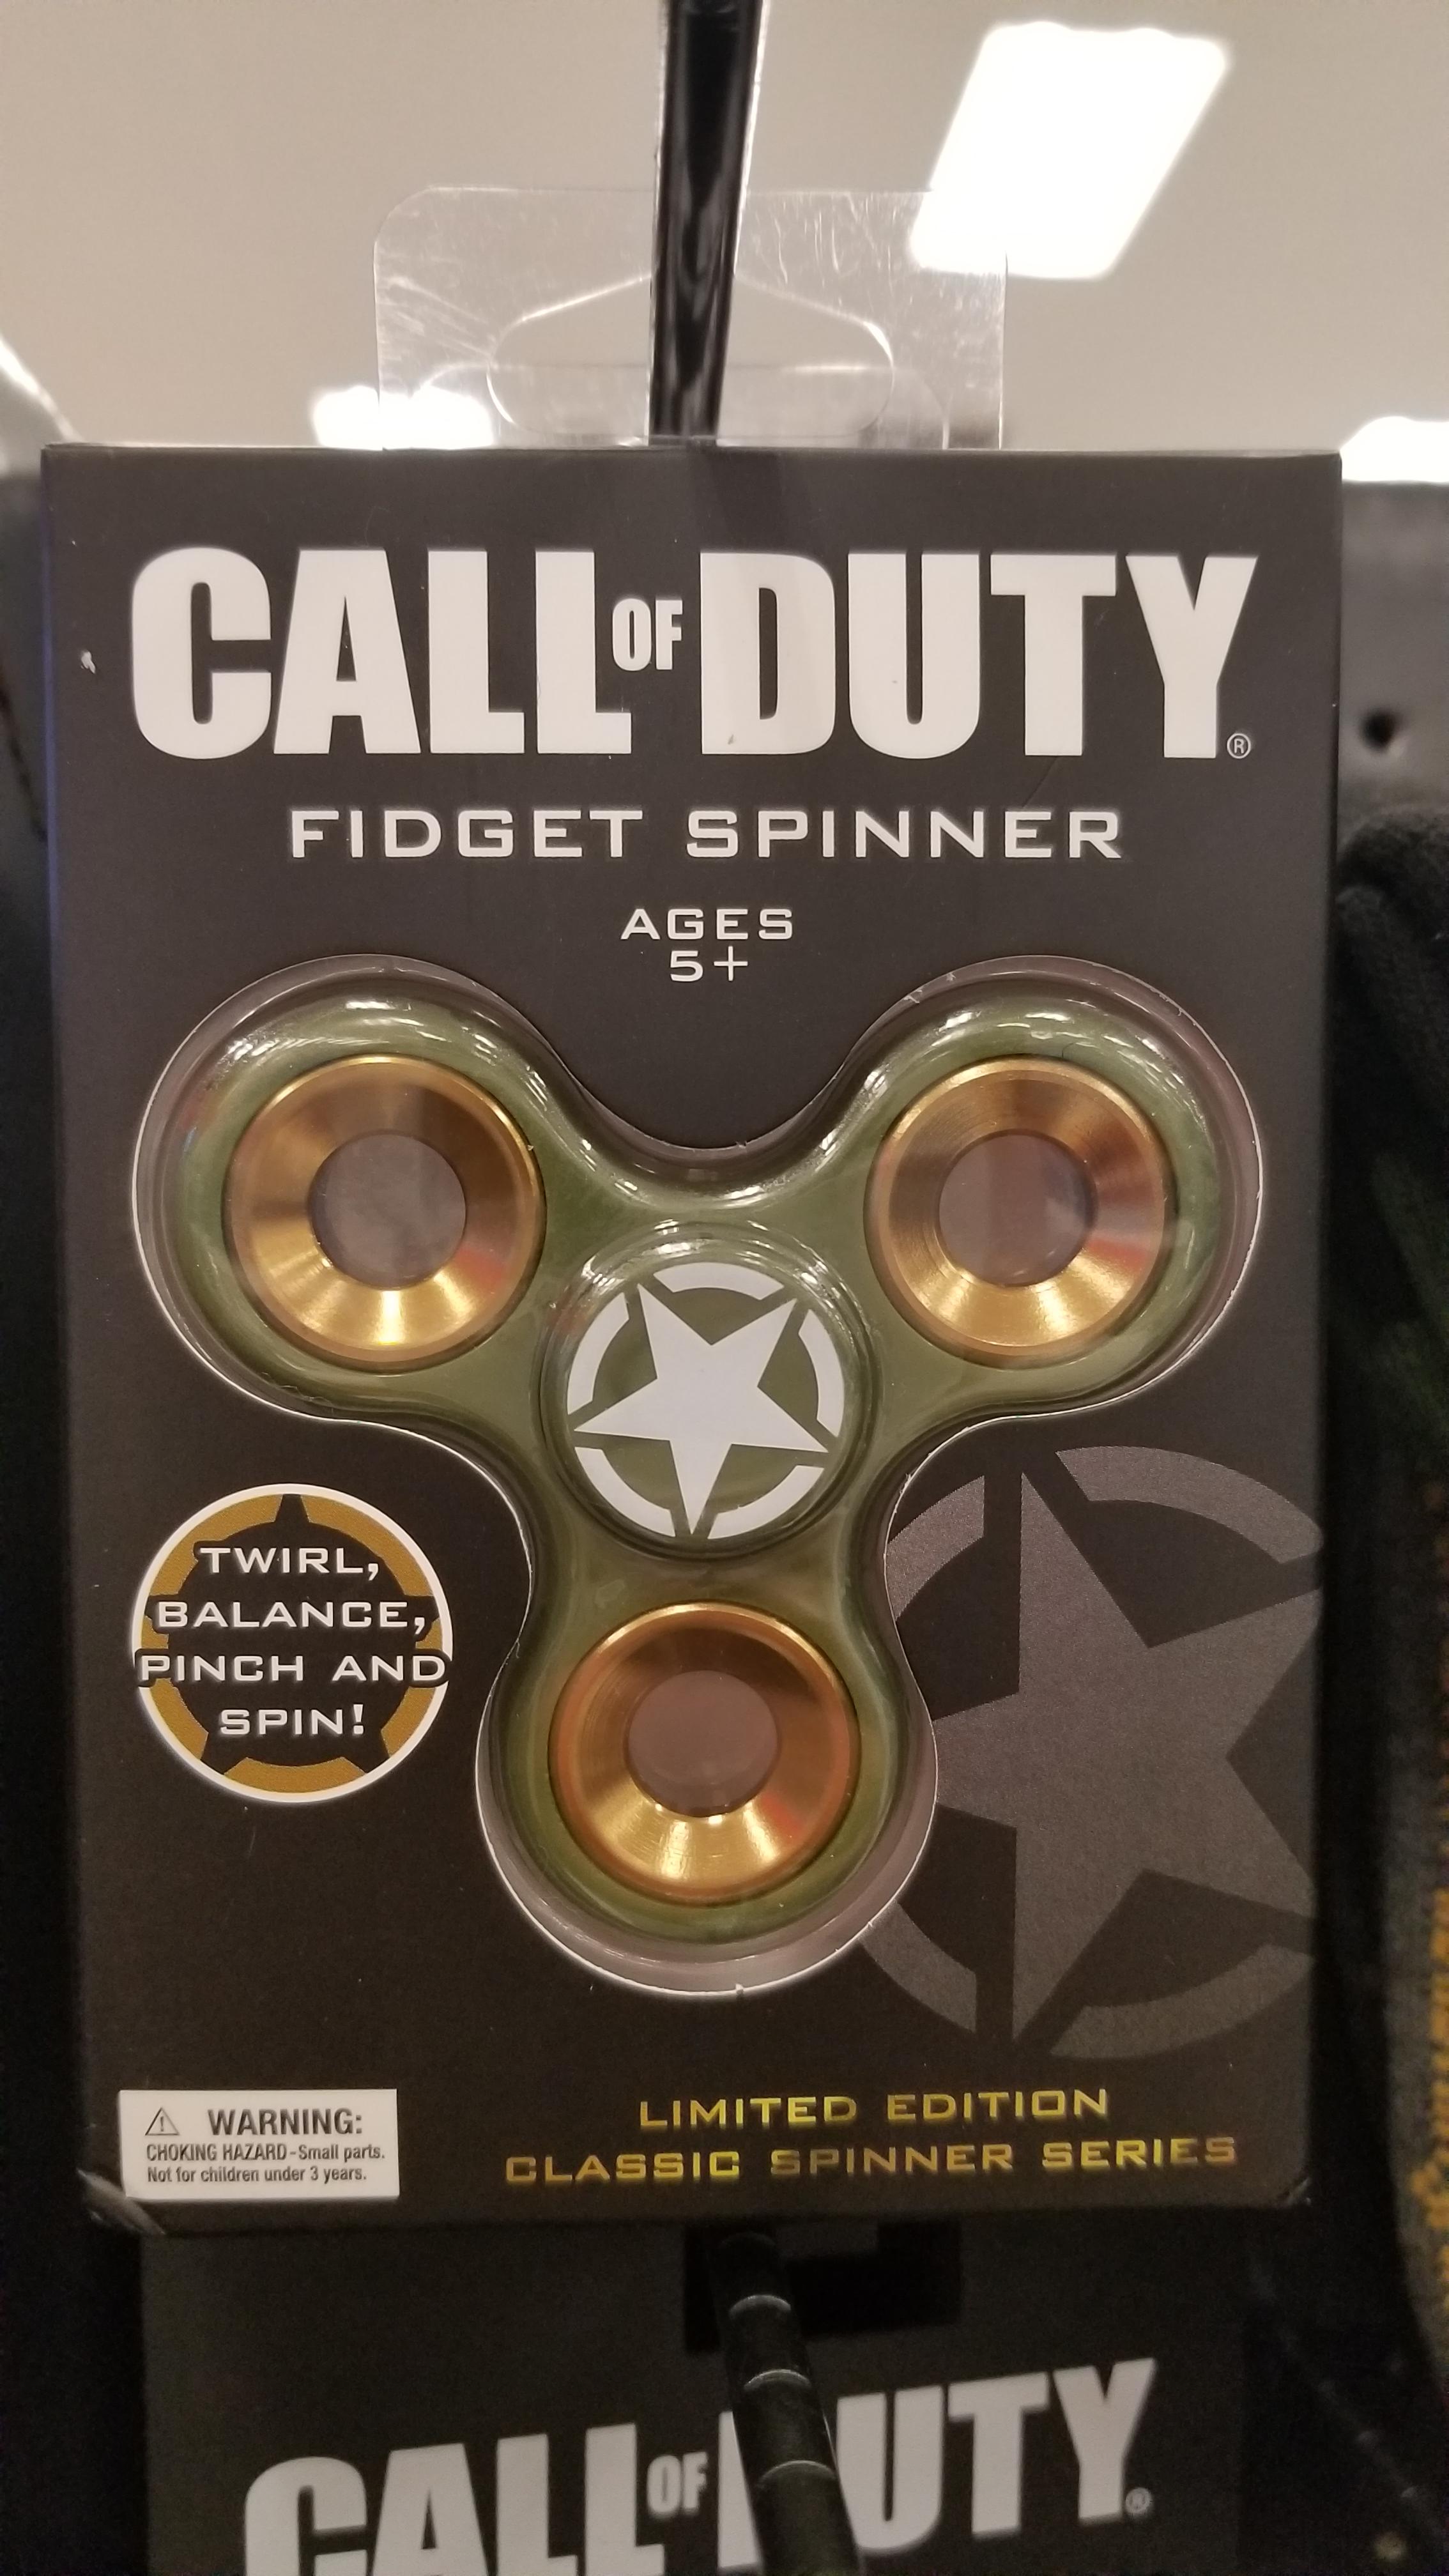 ww2 fidget spinner - Call Duty Fidget Spinner Ages Twirl, Balance, Pinch And Spin! Limited Edition Classic Pinner Series Call Uty.